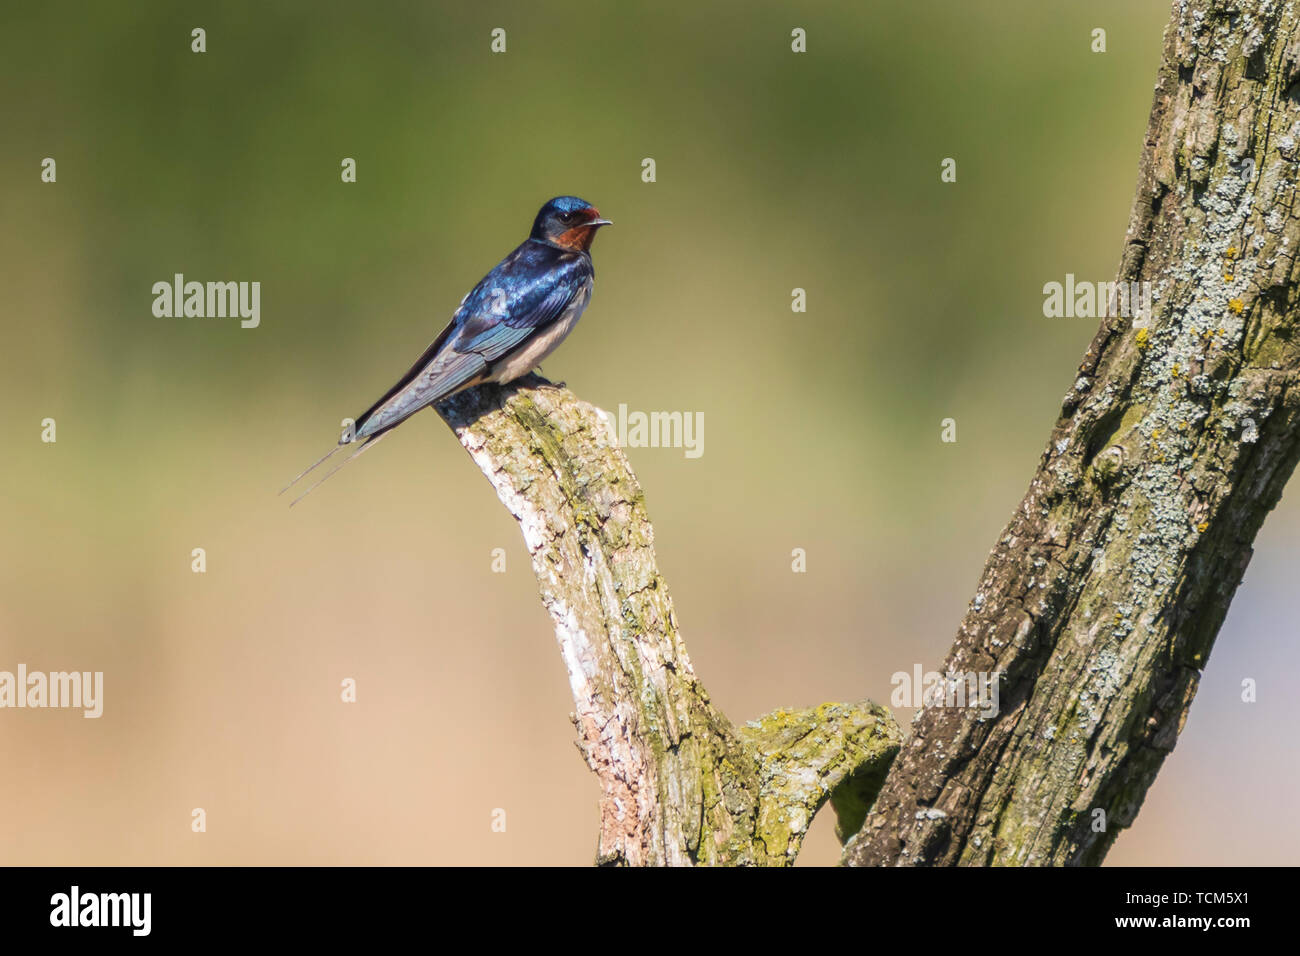 BBarn Swallow bird (Hirundo rustica) perched on a wooden log during Springtime. A large group of these barn swallows foraging and hunts insects and ta Stock Photo